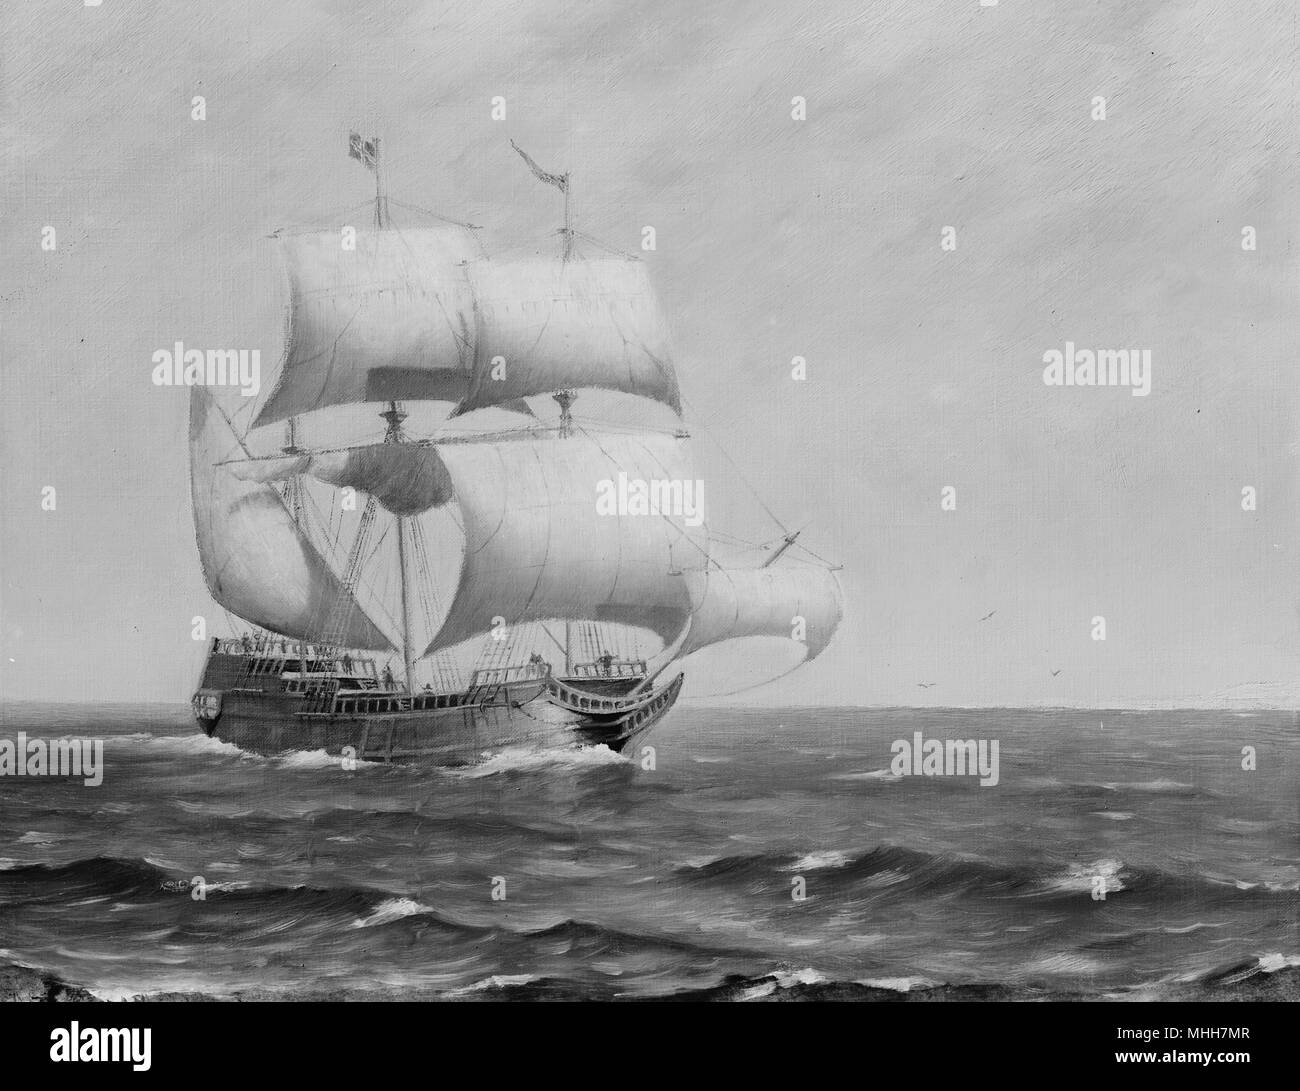 Illustration of the Mayflower as it sails to America Stock Photo